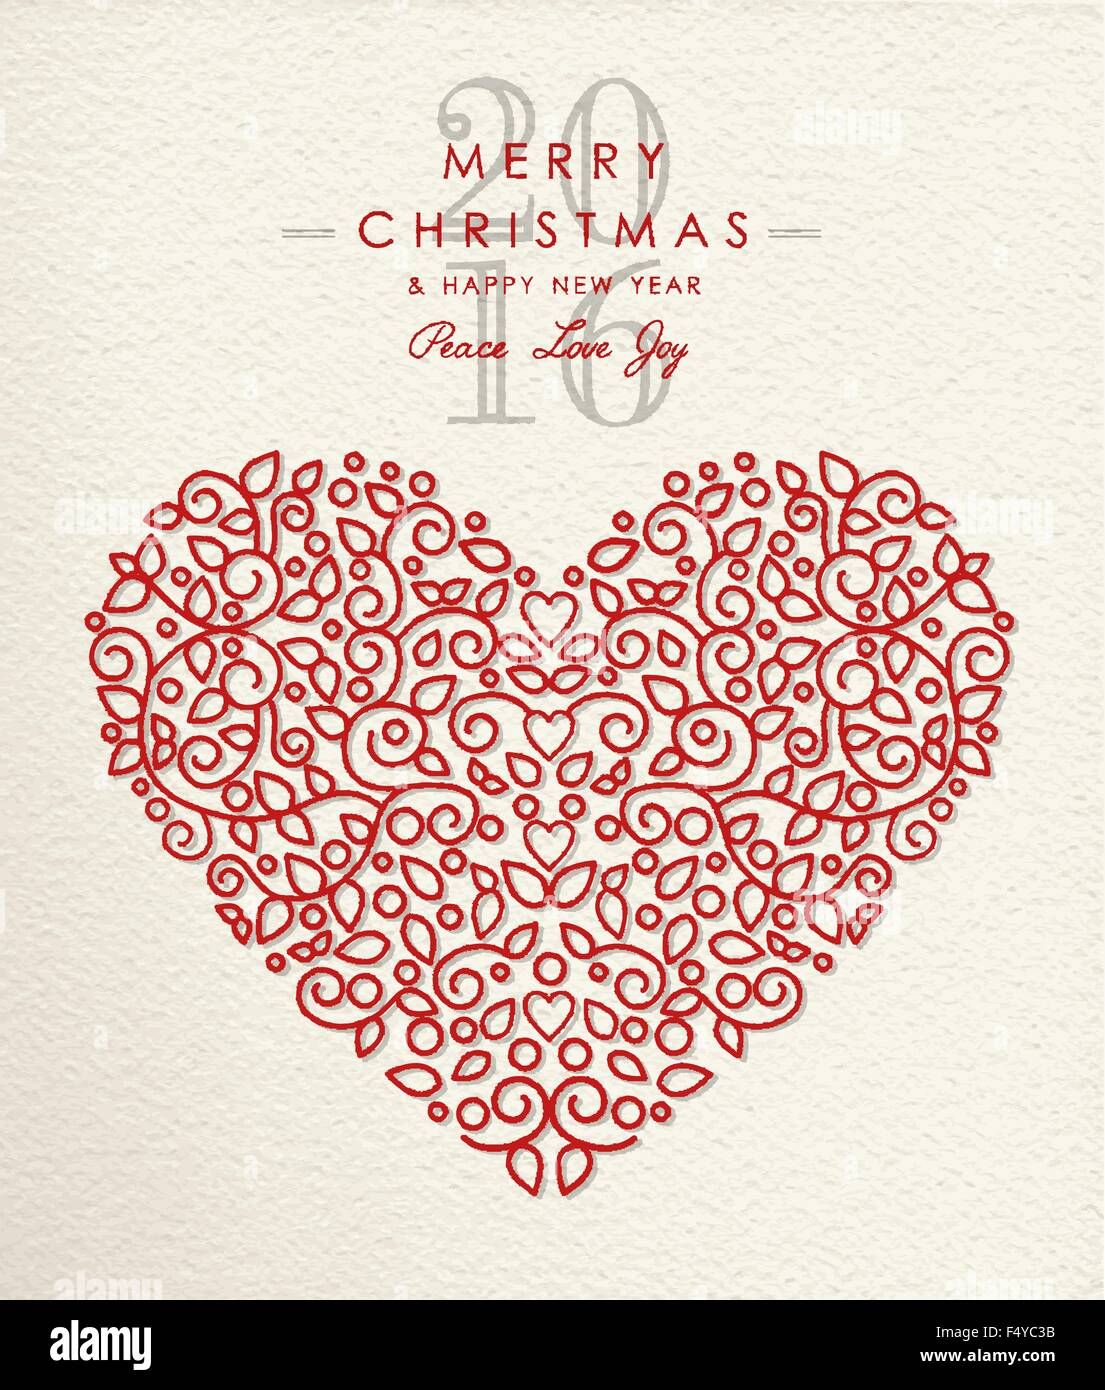 Merry christmas happy new year 2016 heart shape in ornament outline style, holiday love design. Ideal for xmas greeting card. Stock Vector